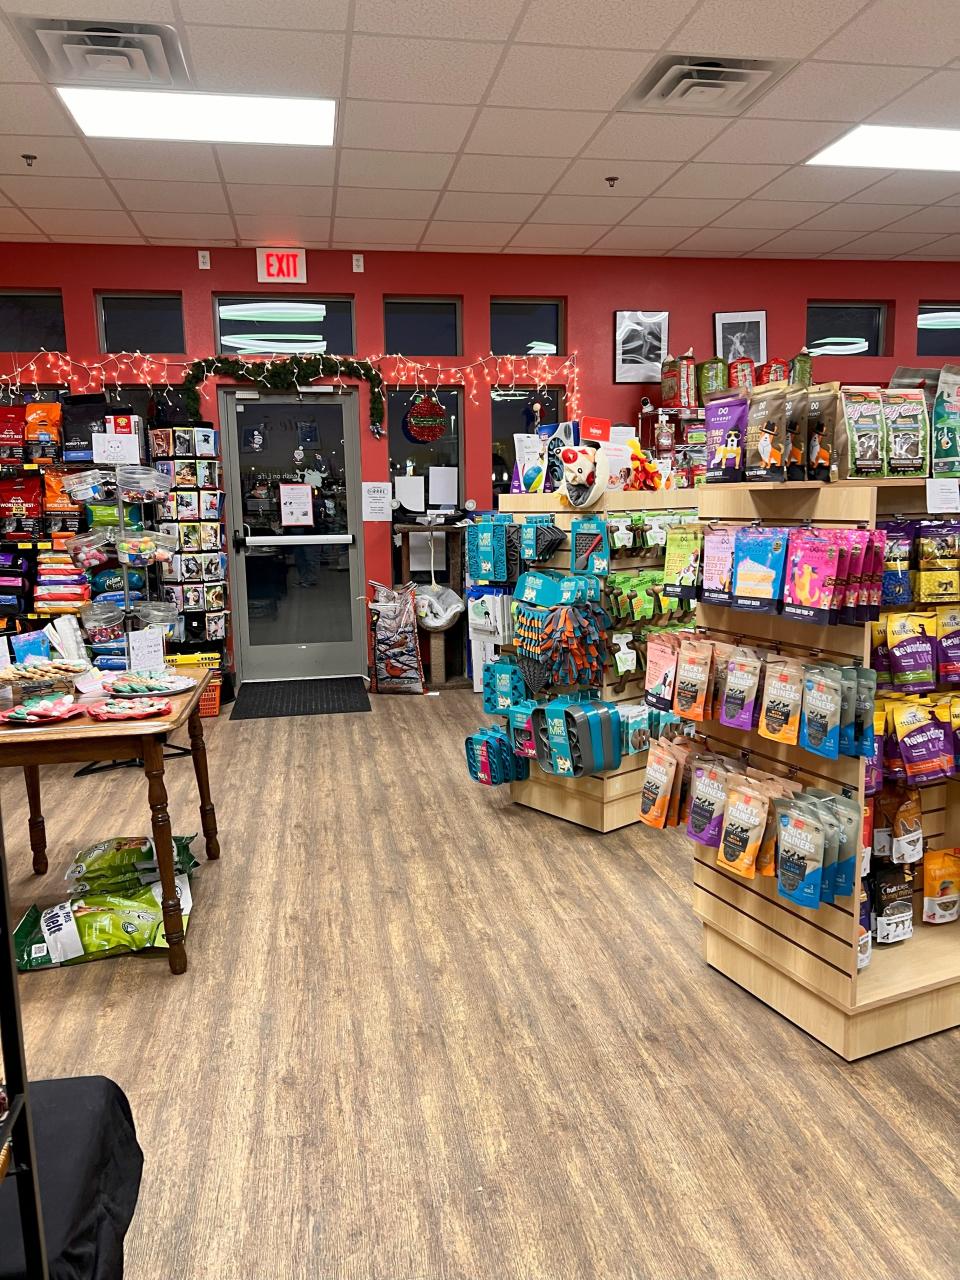 Leash on Life is a local pet supplies store with two locations, one in Iowa City and the other in North Liberty. Pictured above is the North Liberty location located at 650 Pacha Pkwy #5. Leash on Life is opened from 10 a.m.- 6 p.m. Monday through Saturday.